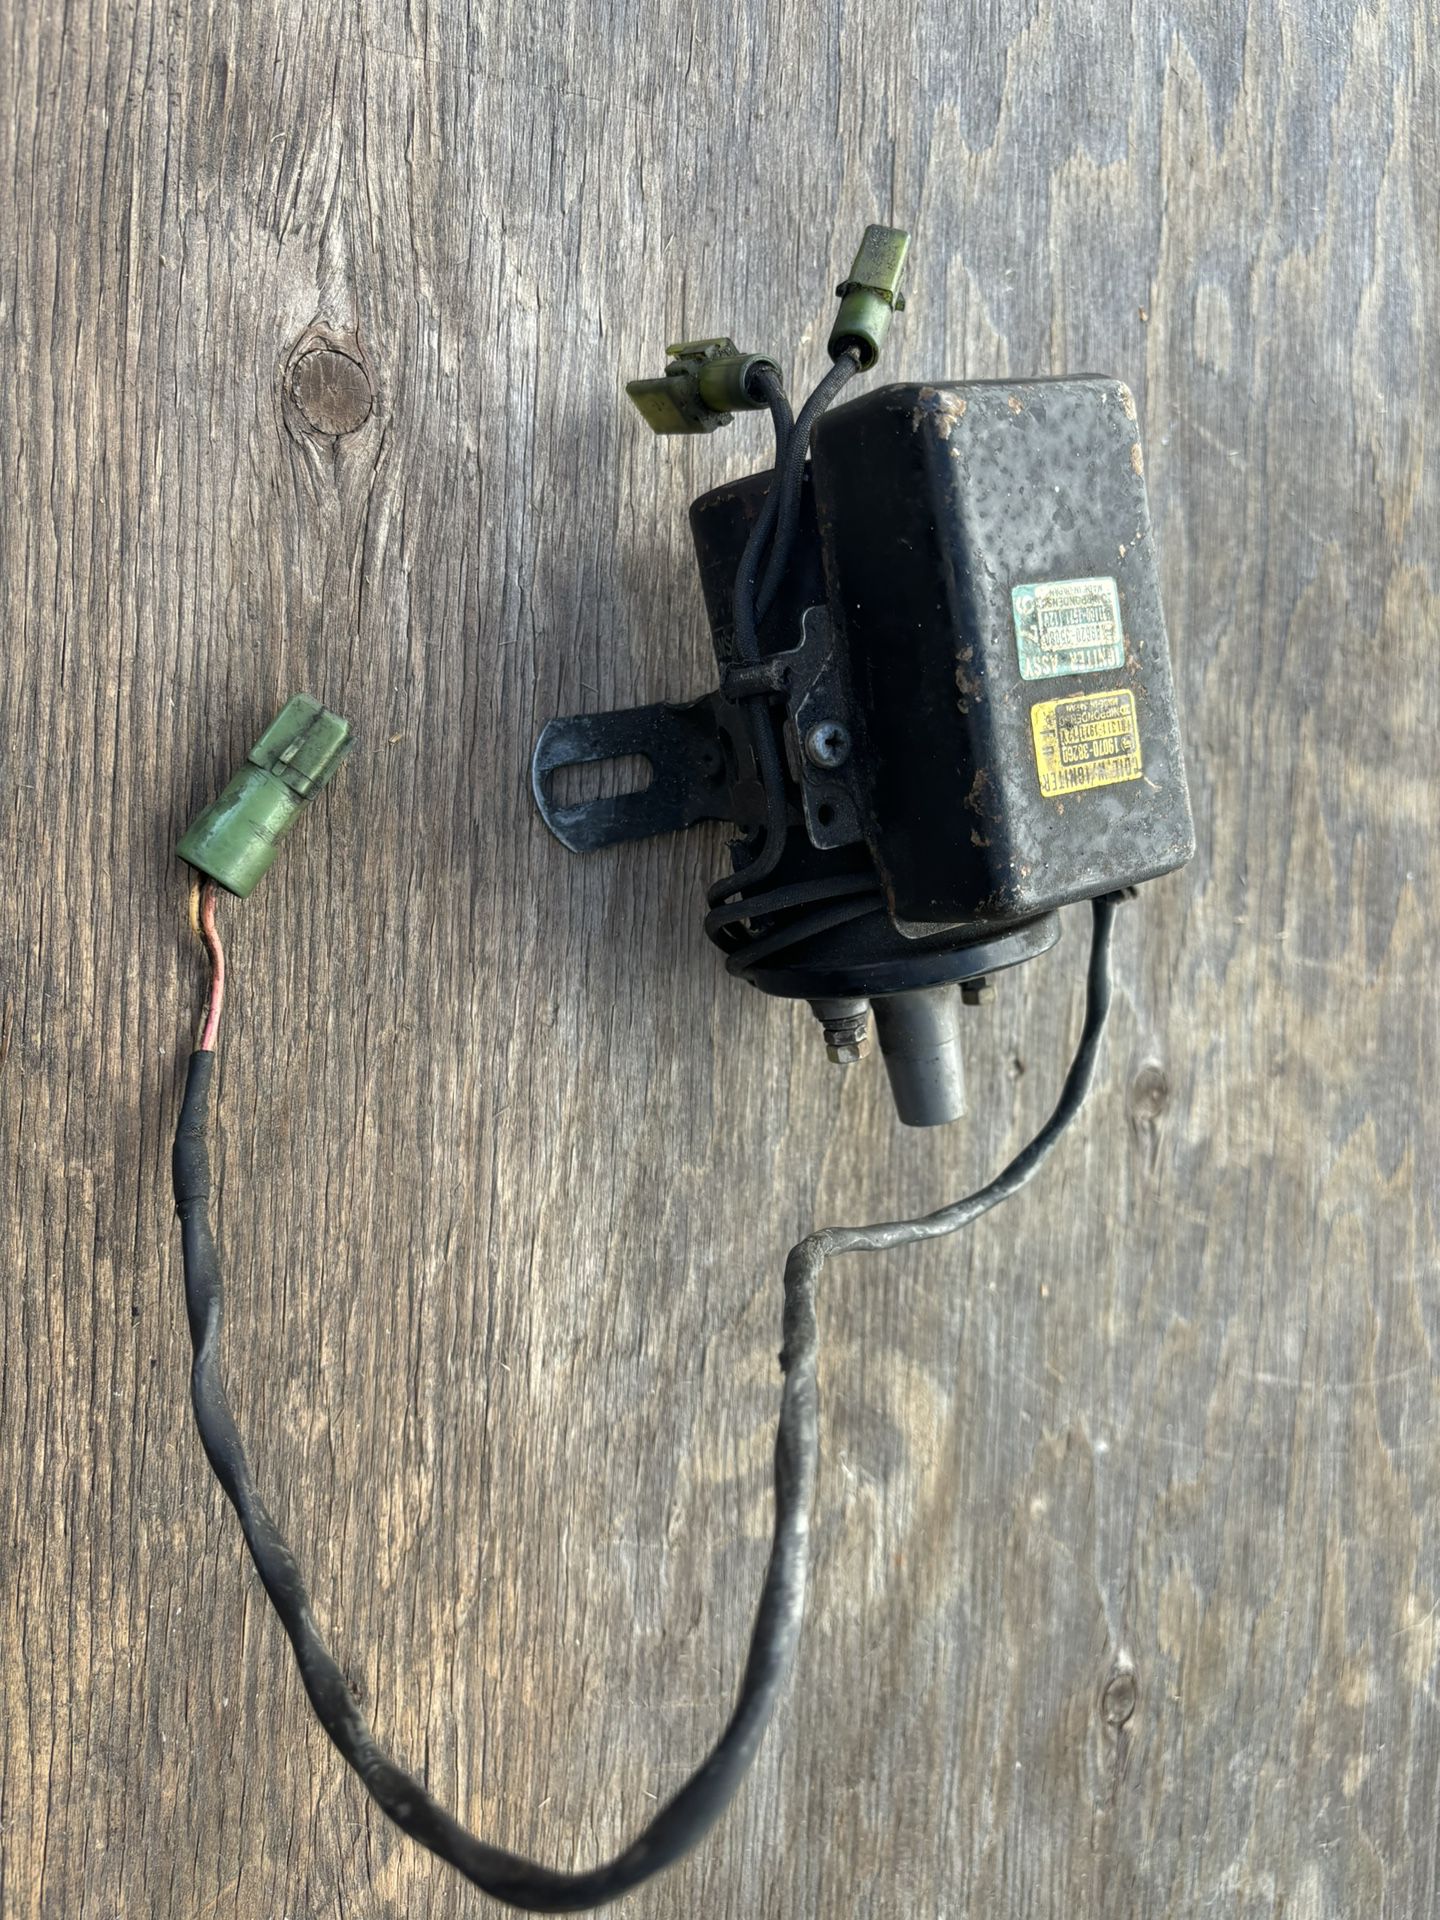 Toyota Pickup Ignition Coil